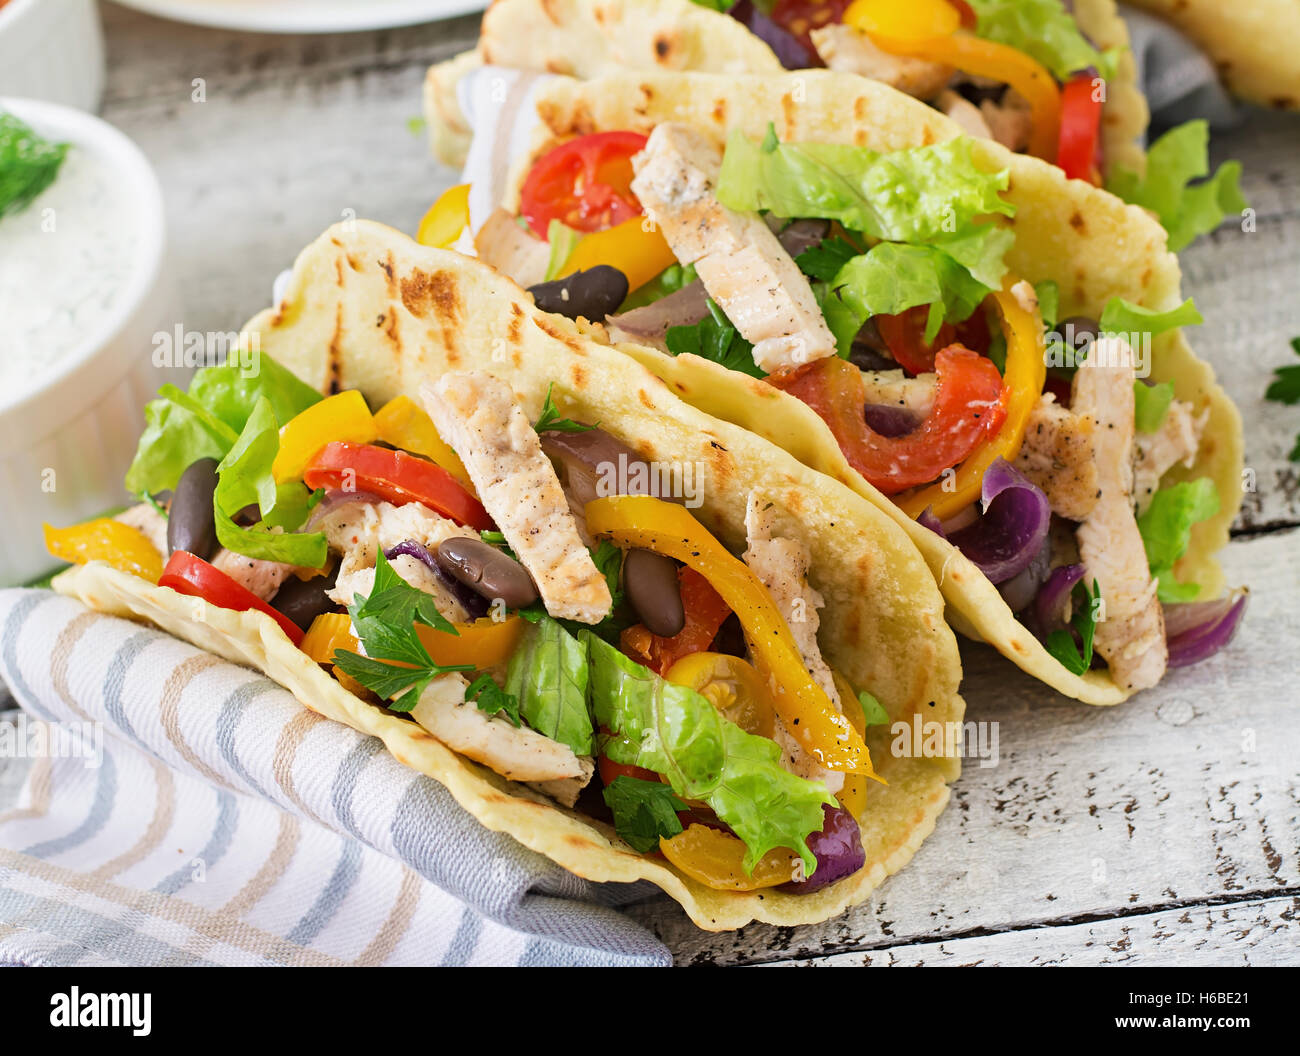 Mexican tacos with chicken, bell peppers, black beans and fresh vegetables and tartar sauce. Stock Photo